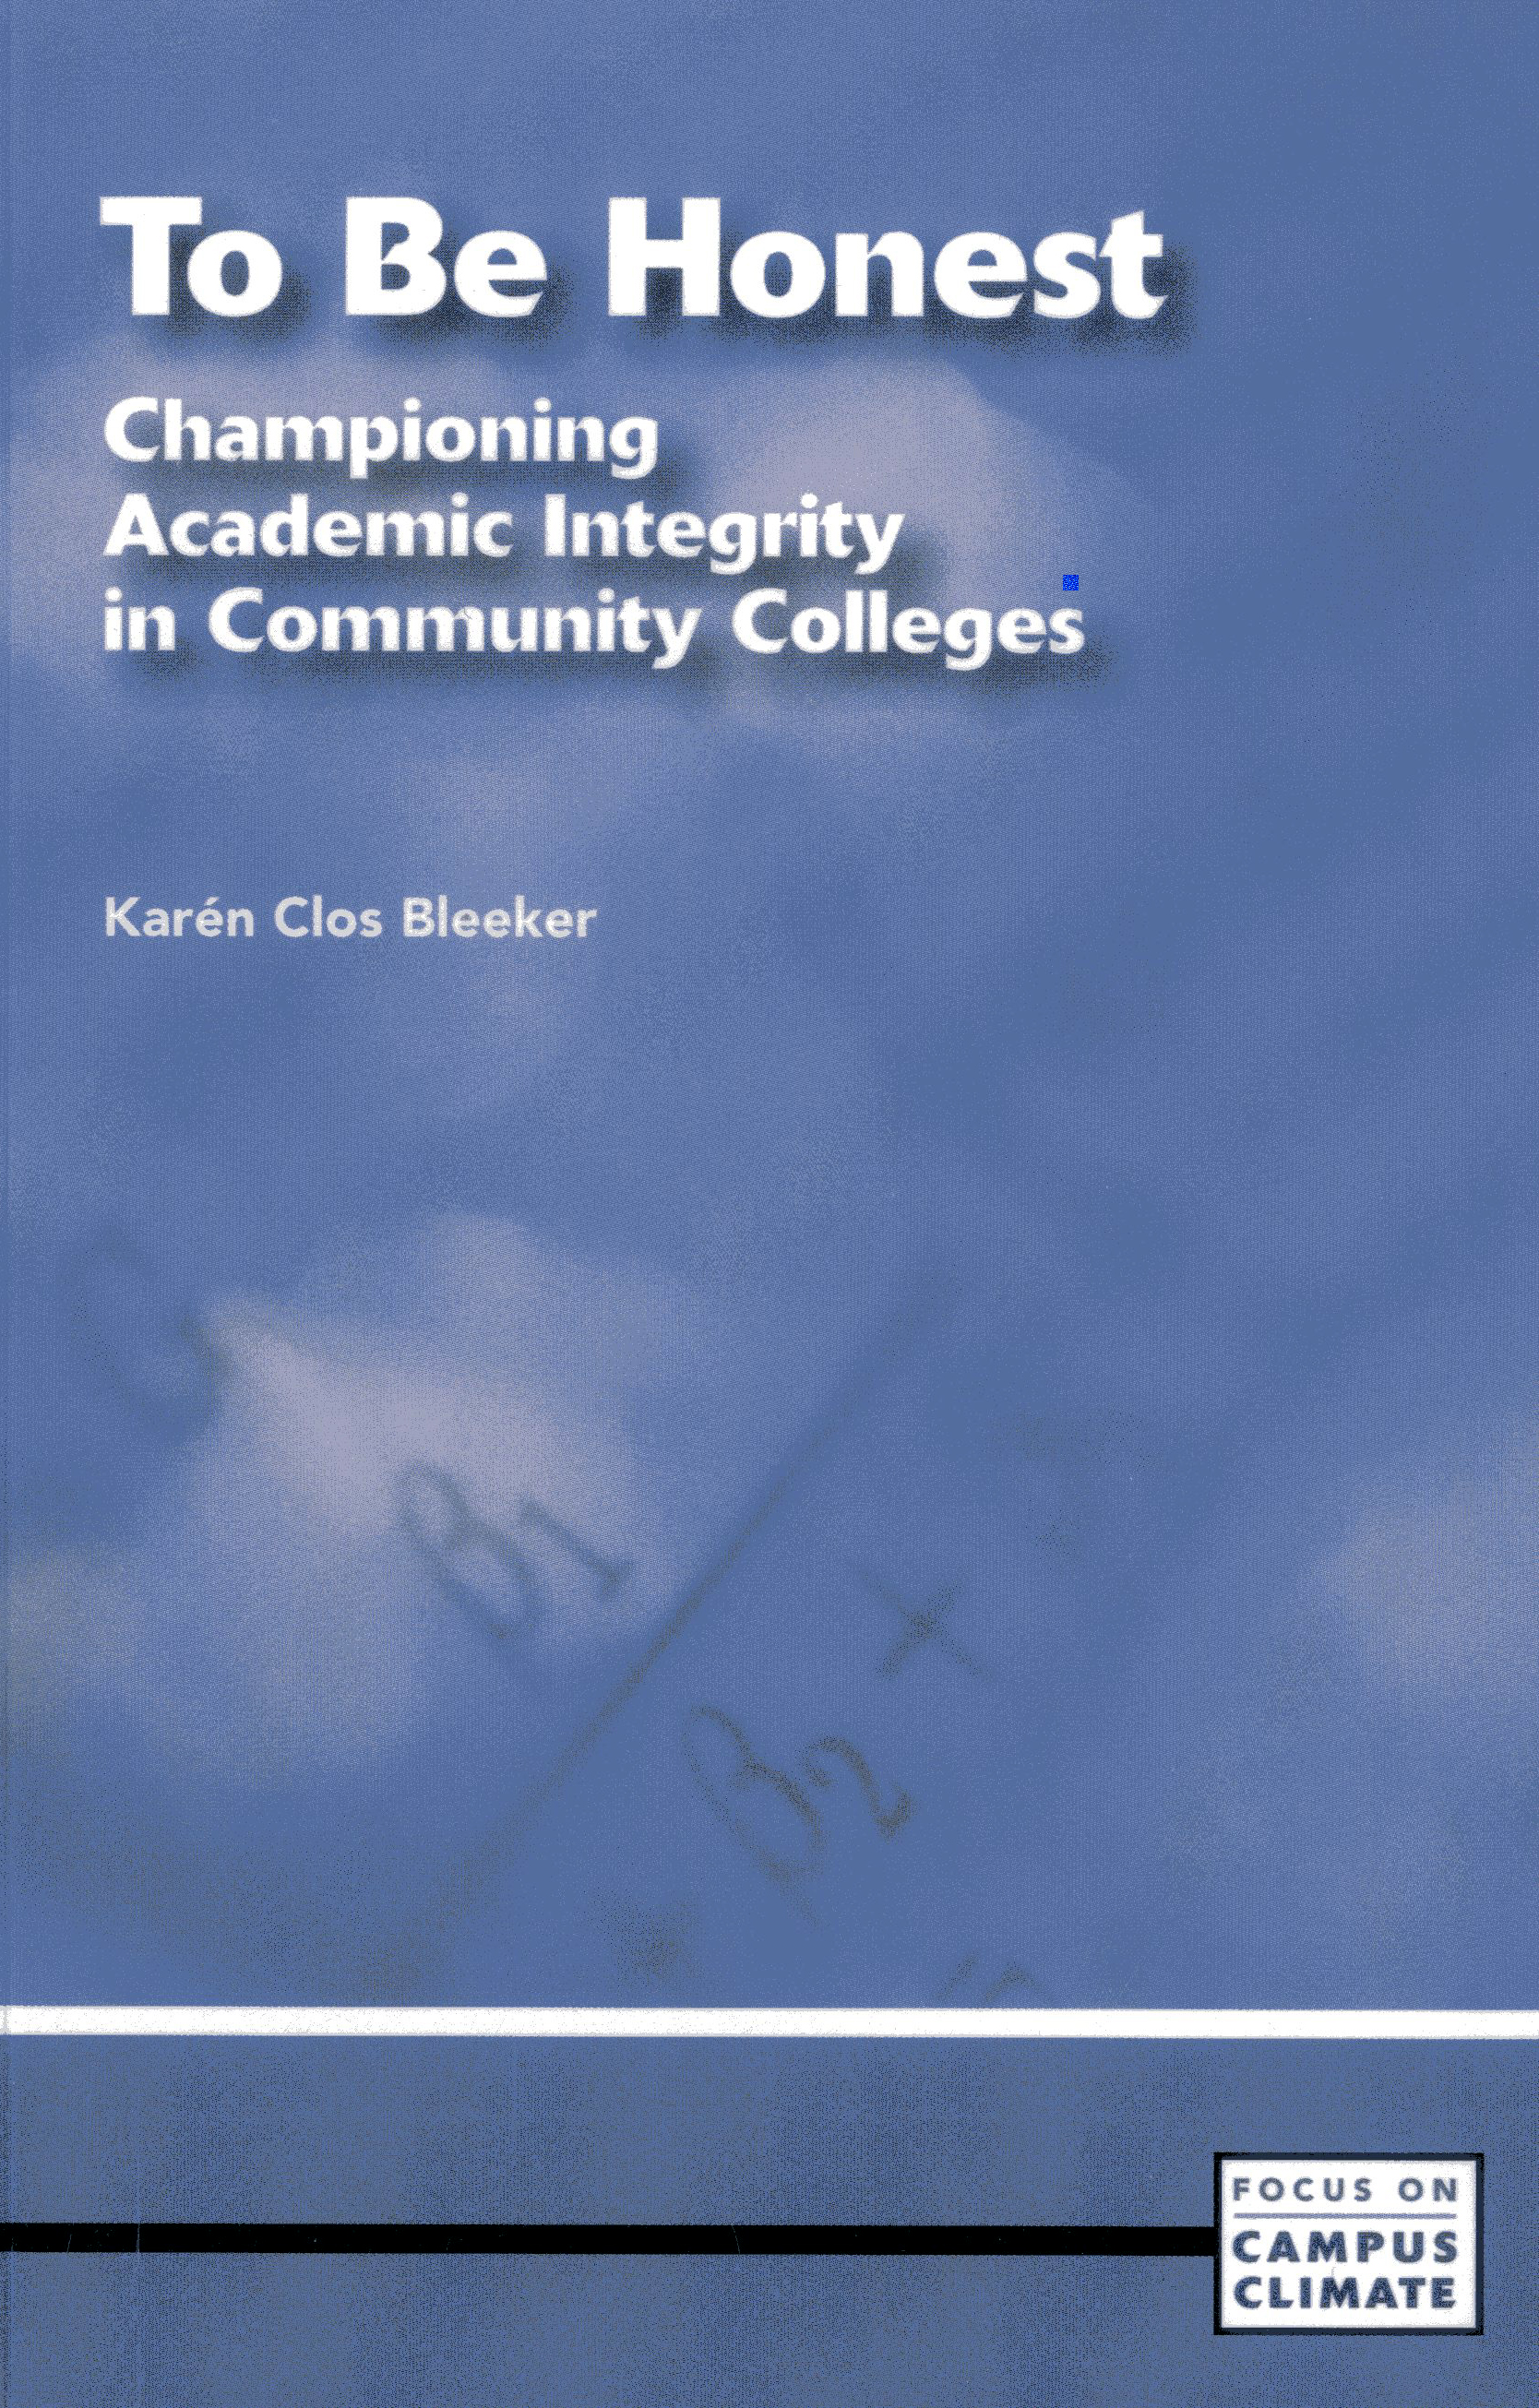 To Be Honest: Championing Academic Integrity in Community Colleges